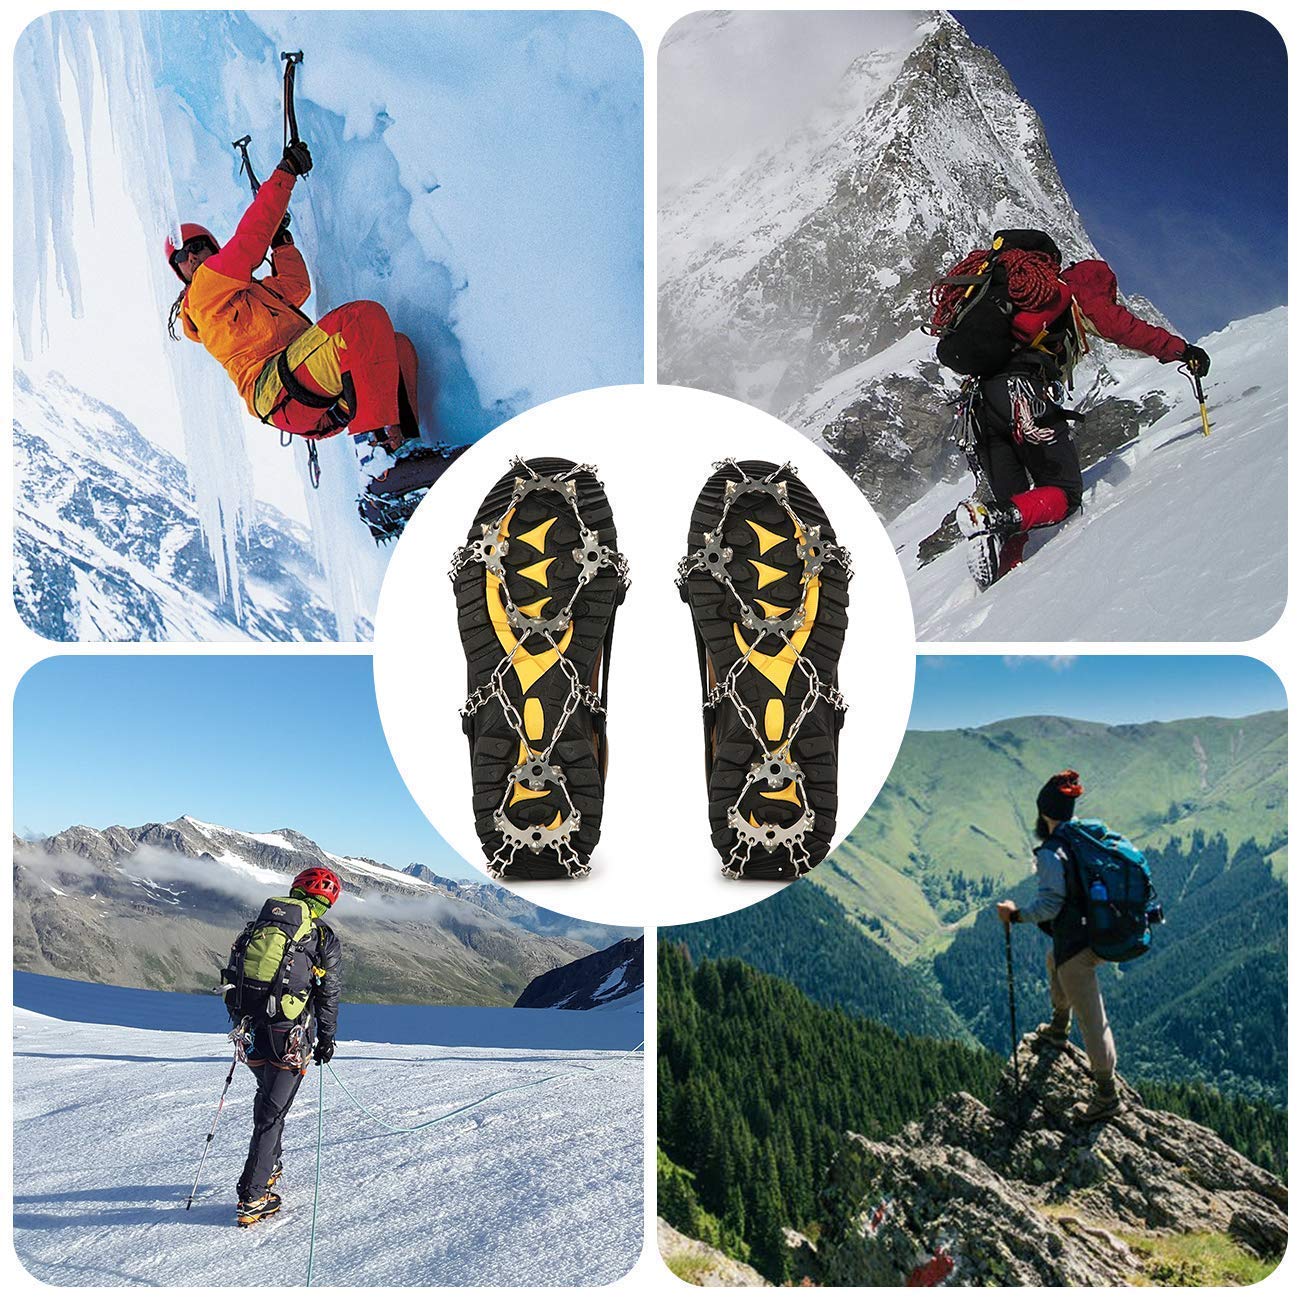 Wirezoll Crampons, Stainless Steel Ice Traction Cleats for Snow Boots and  Shoes, Safe Protect Grips for Hiking Fishing Walking Mountaineering etc.